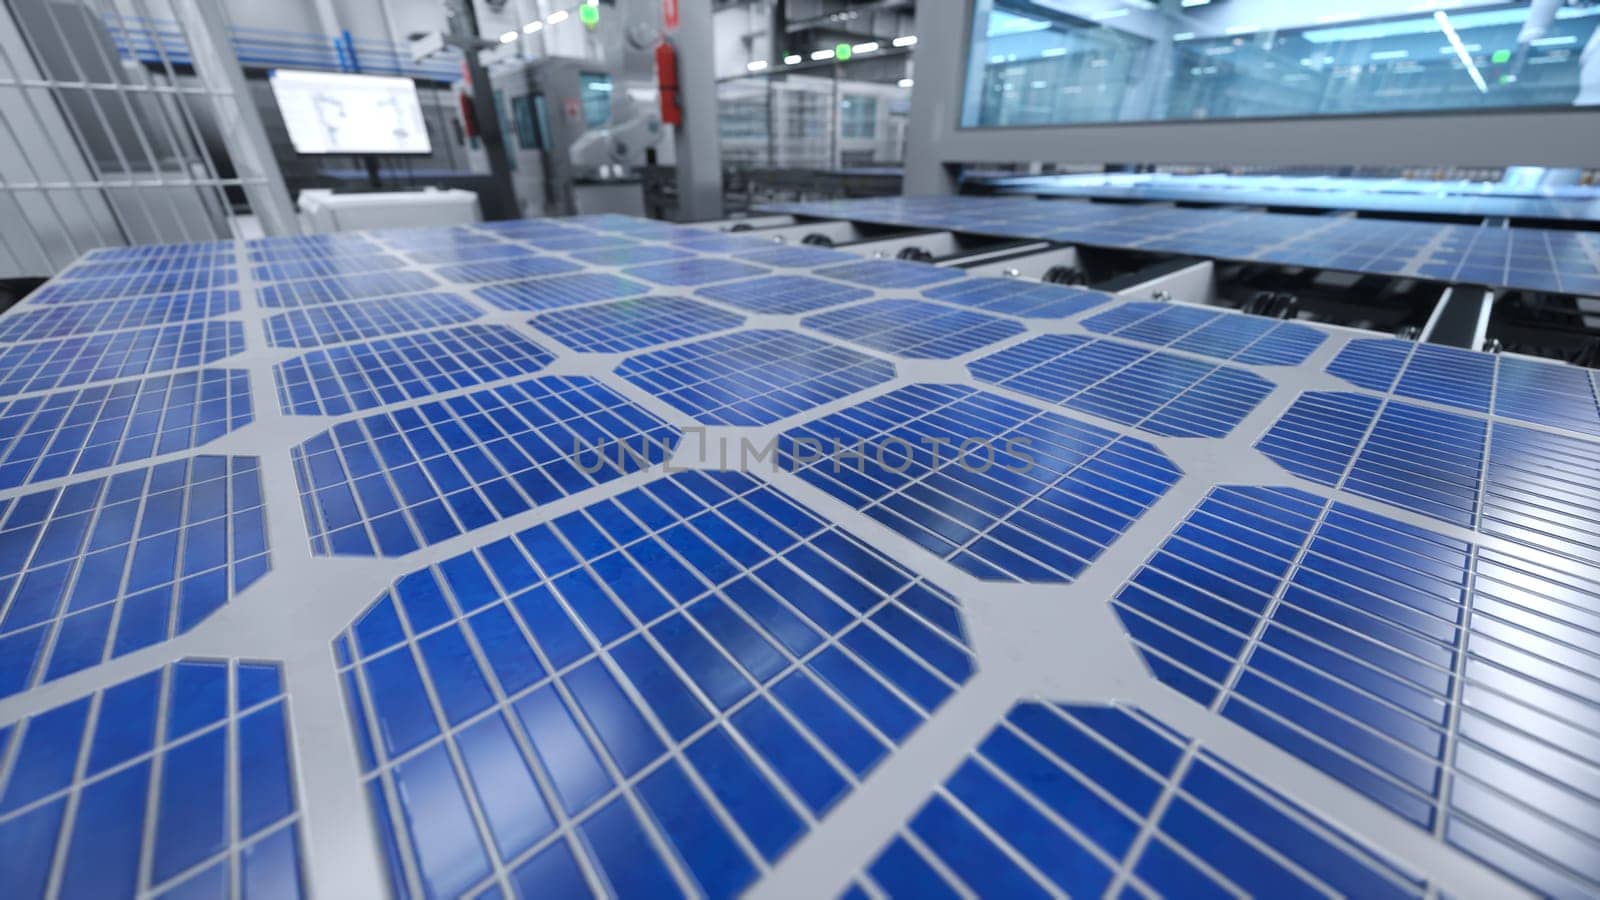 Solar panel placed on conveyor belt, operated by industrial robot arm, moving around facility, 3D illustration. Close up of photovoltaic cell produced in green energy manufacturing warehouse